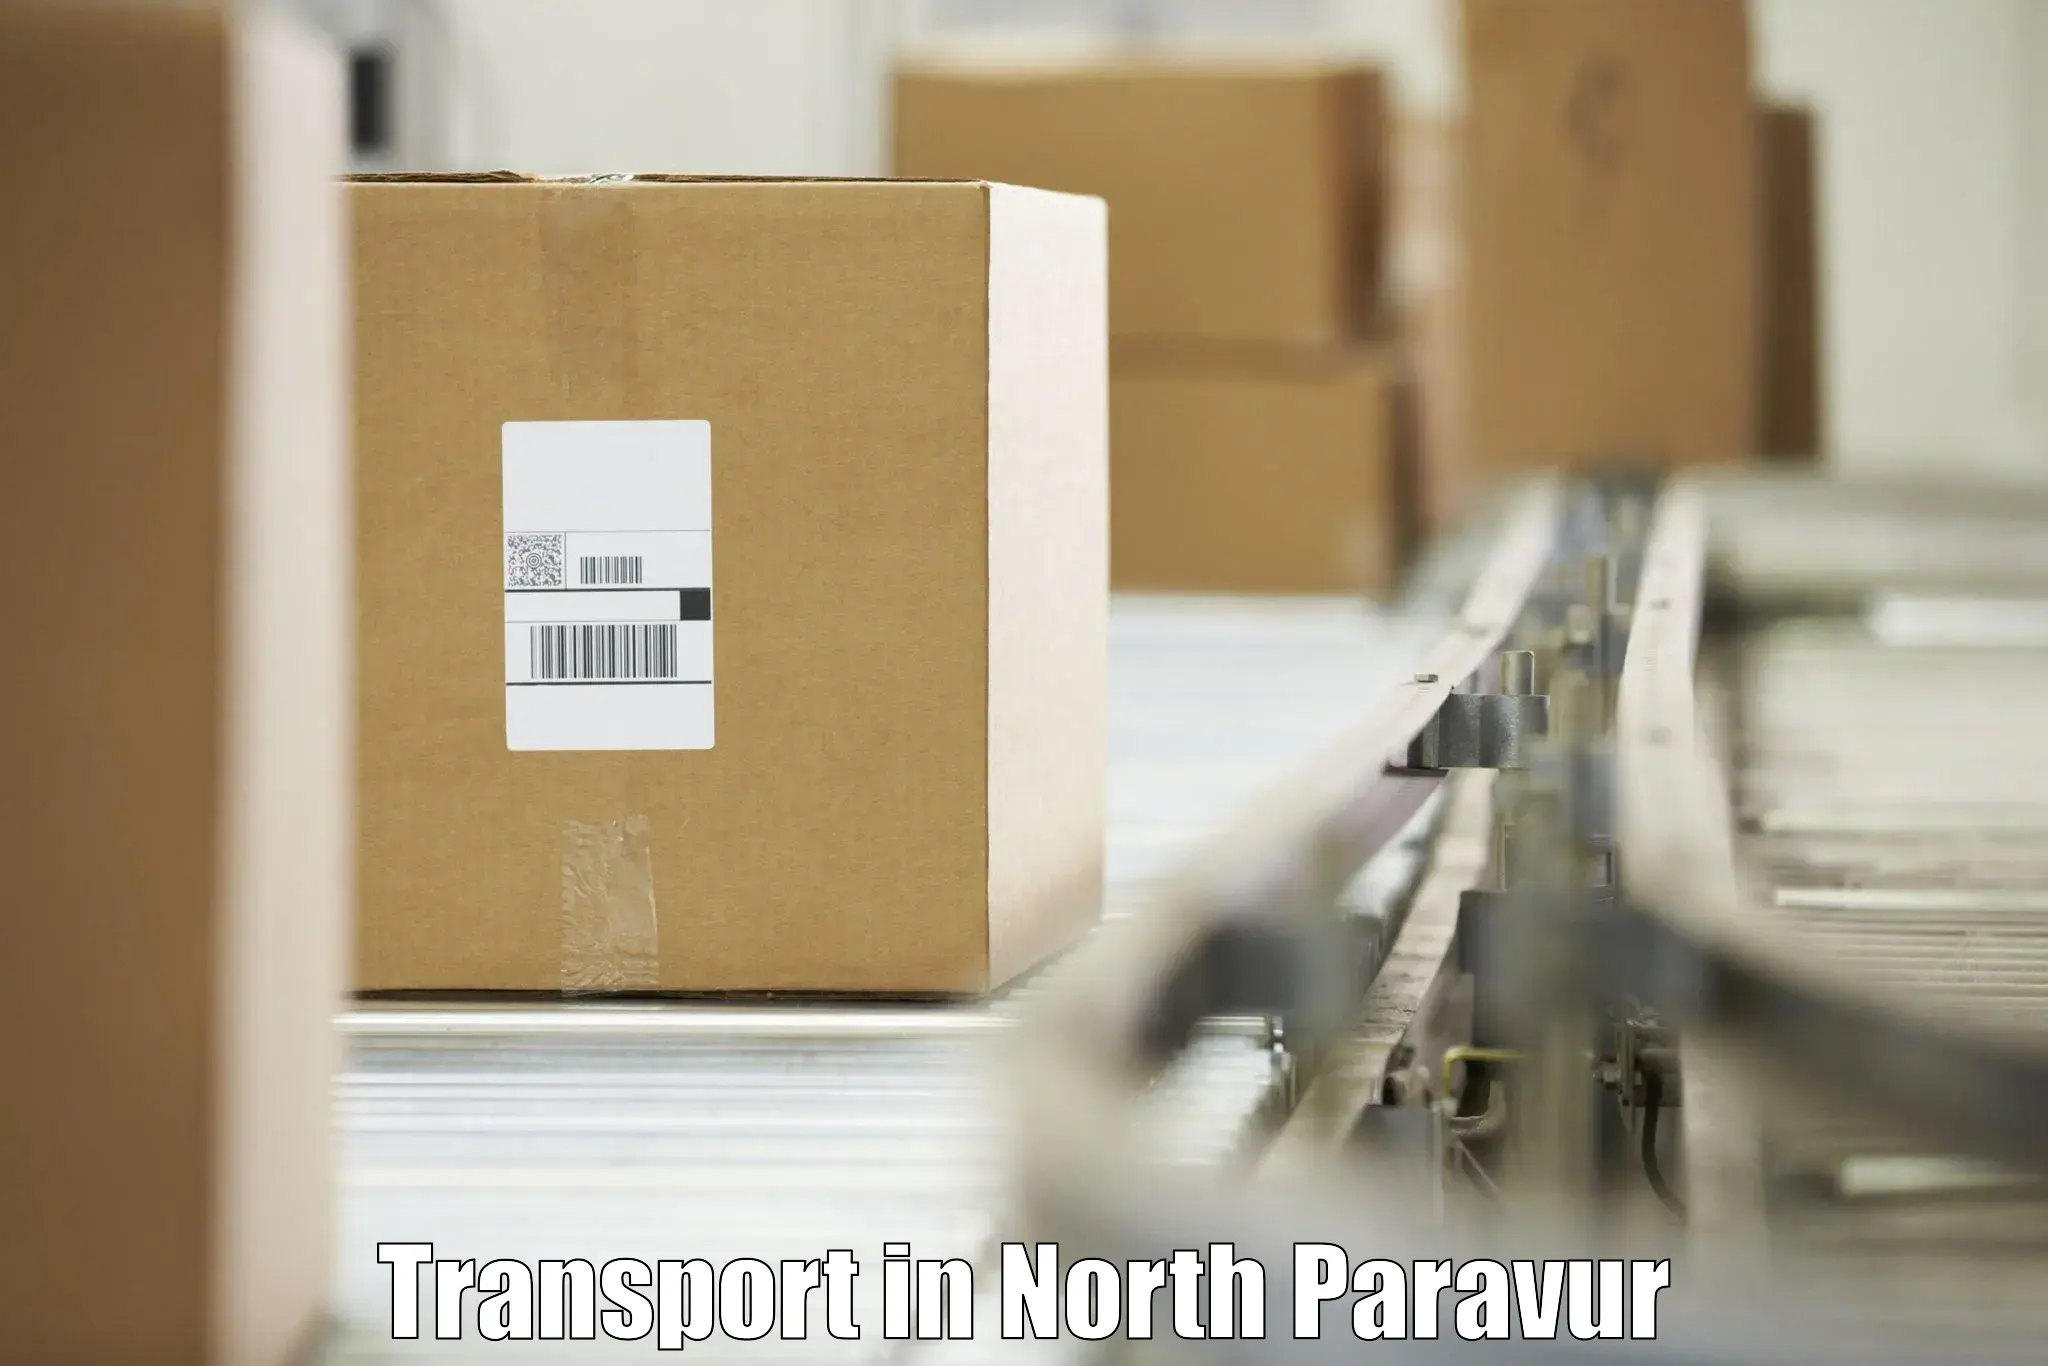 Domestic transport services in North Paravur